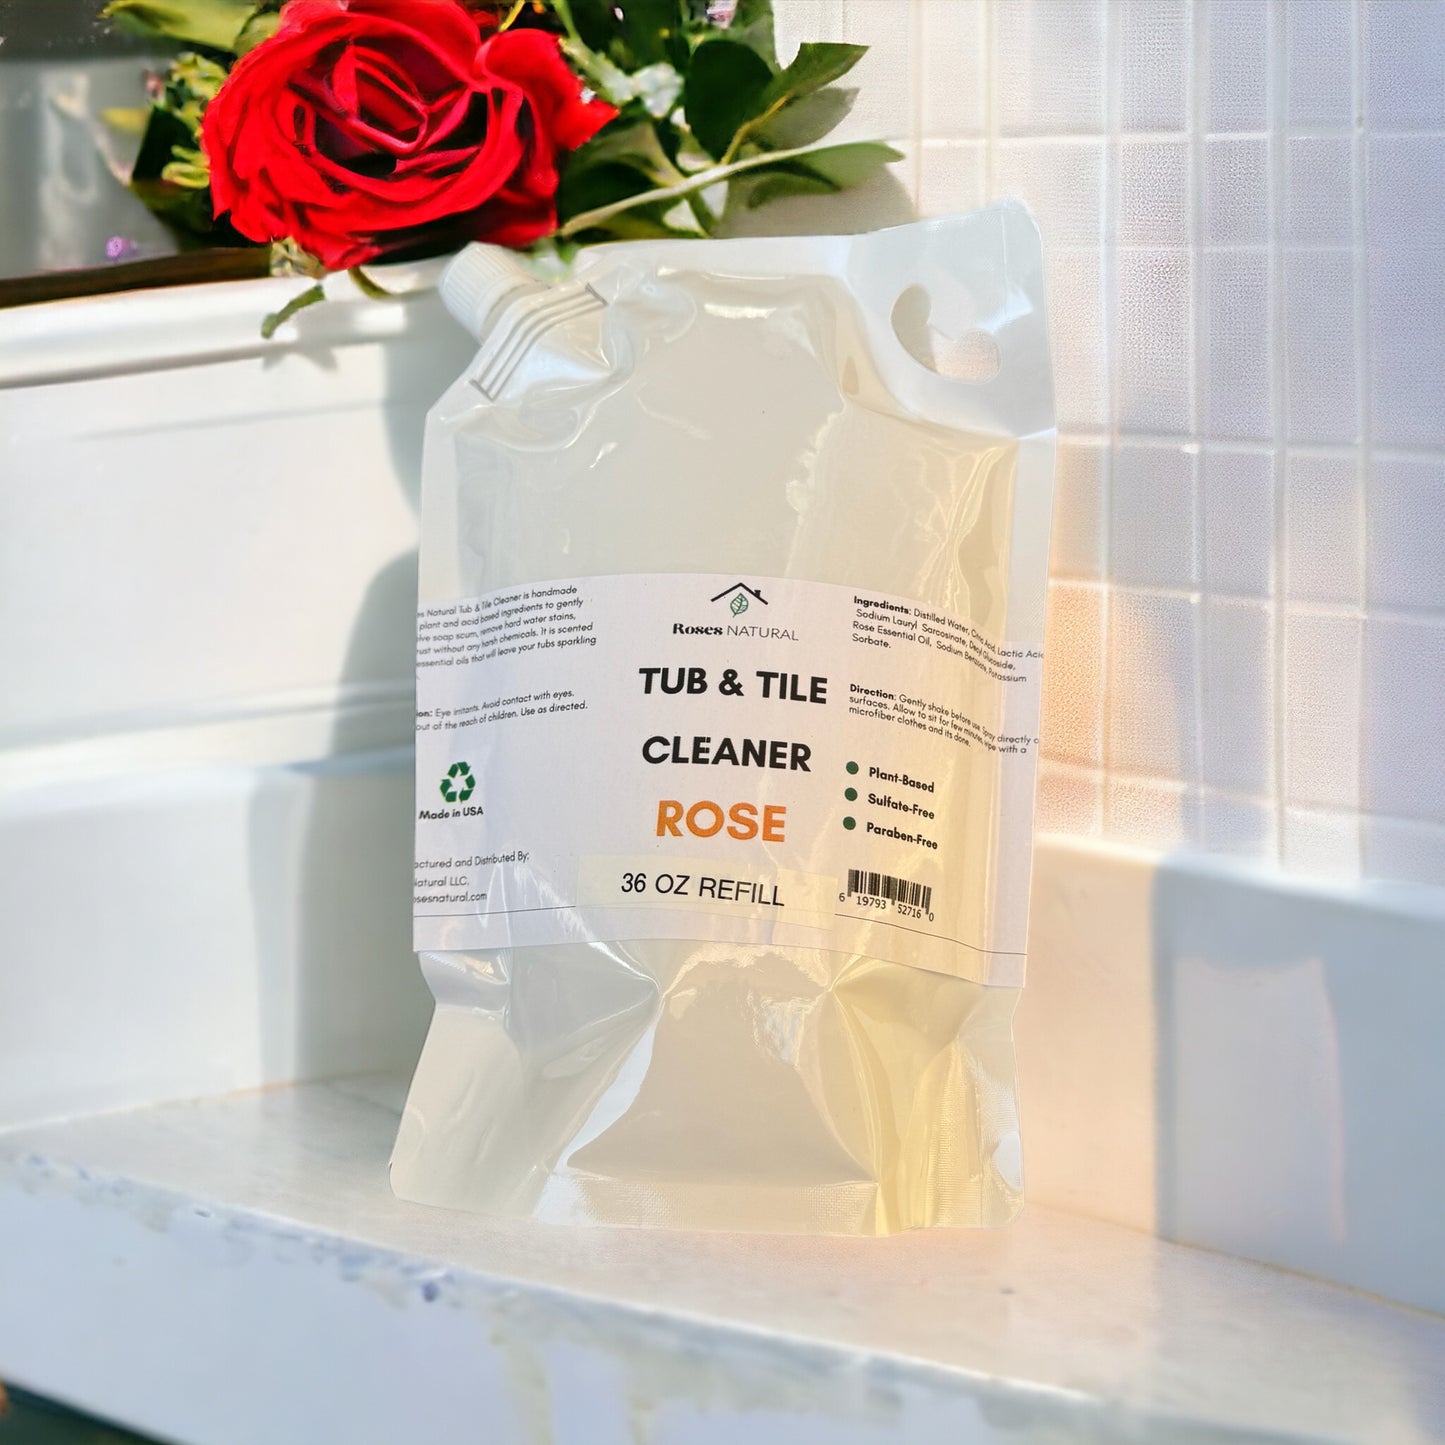 Rose Tub & Tile Cleaner with Refill